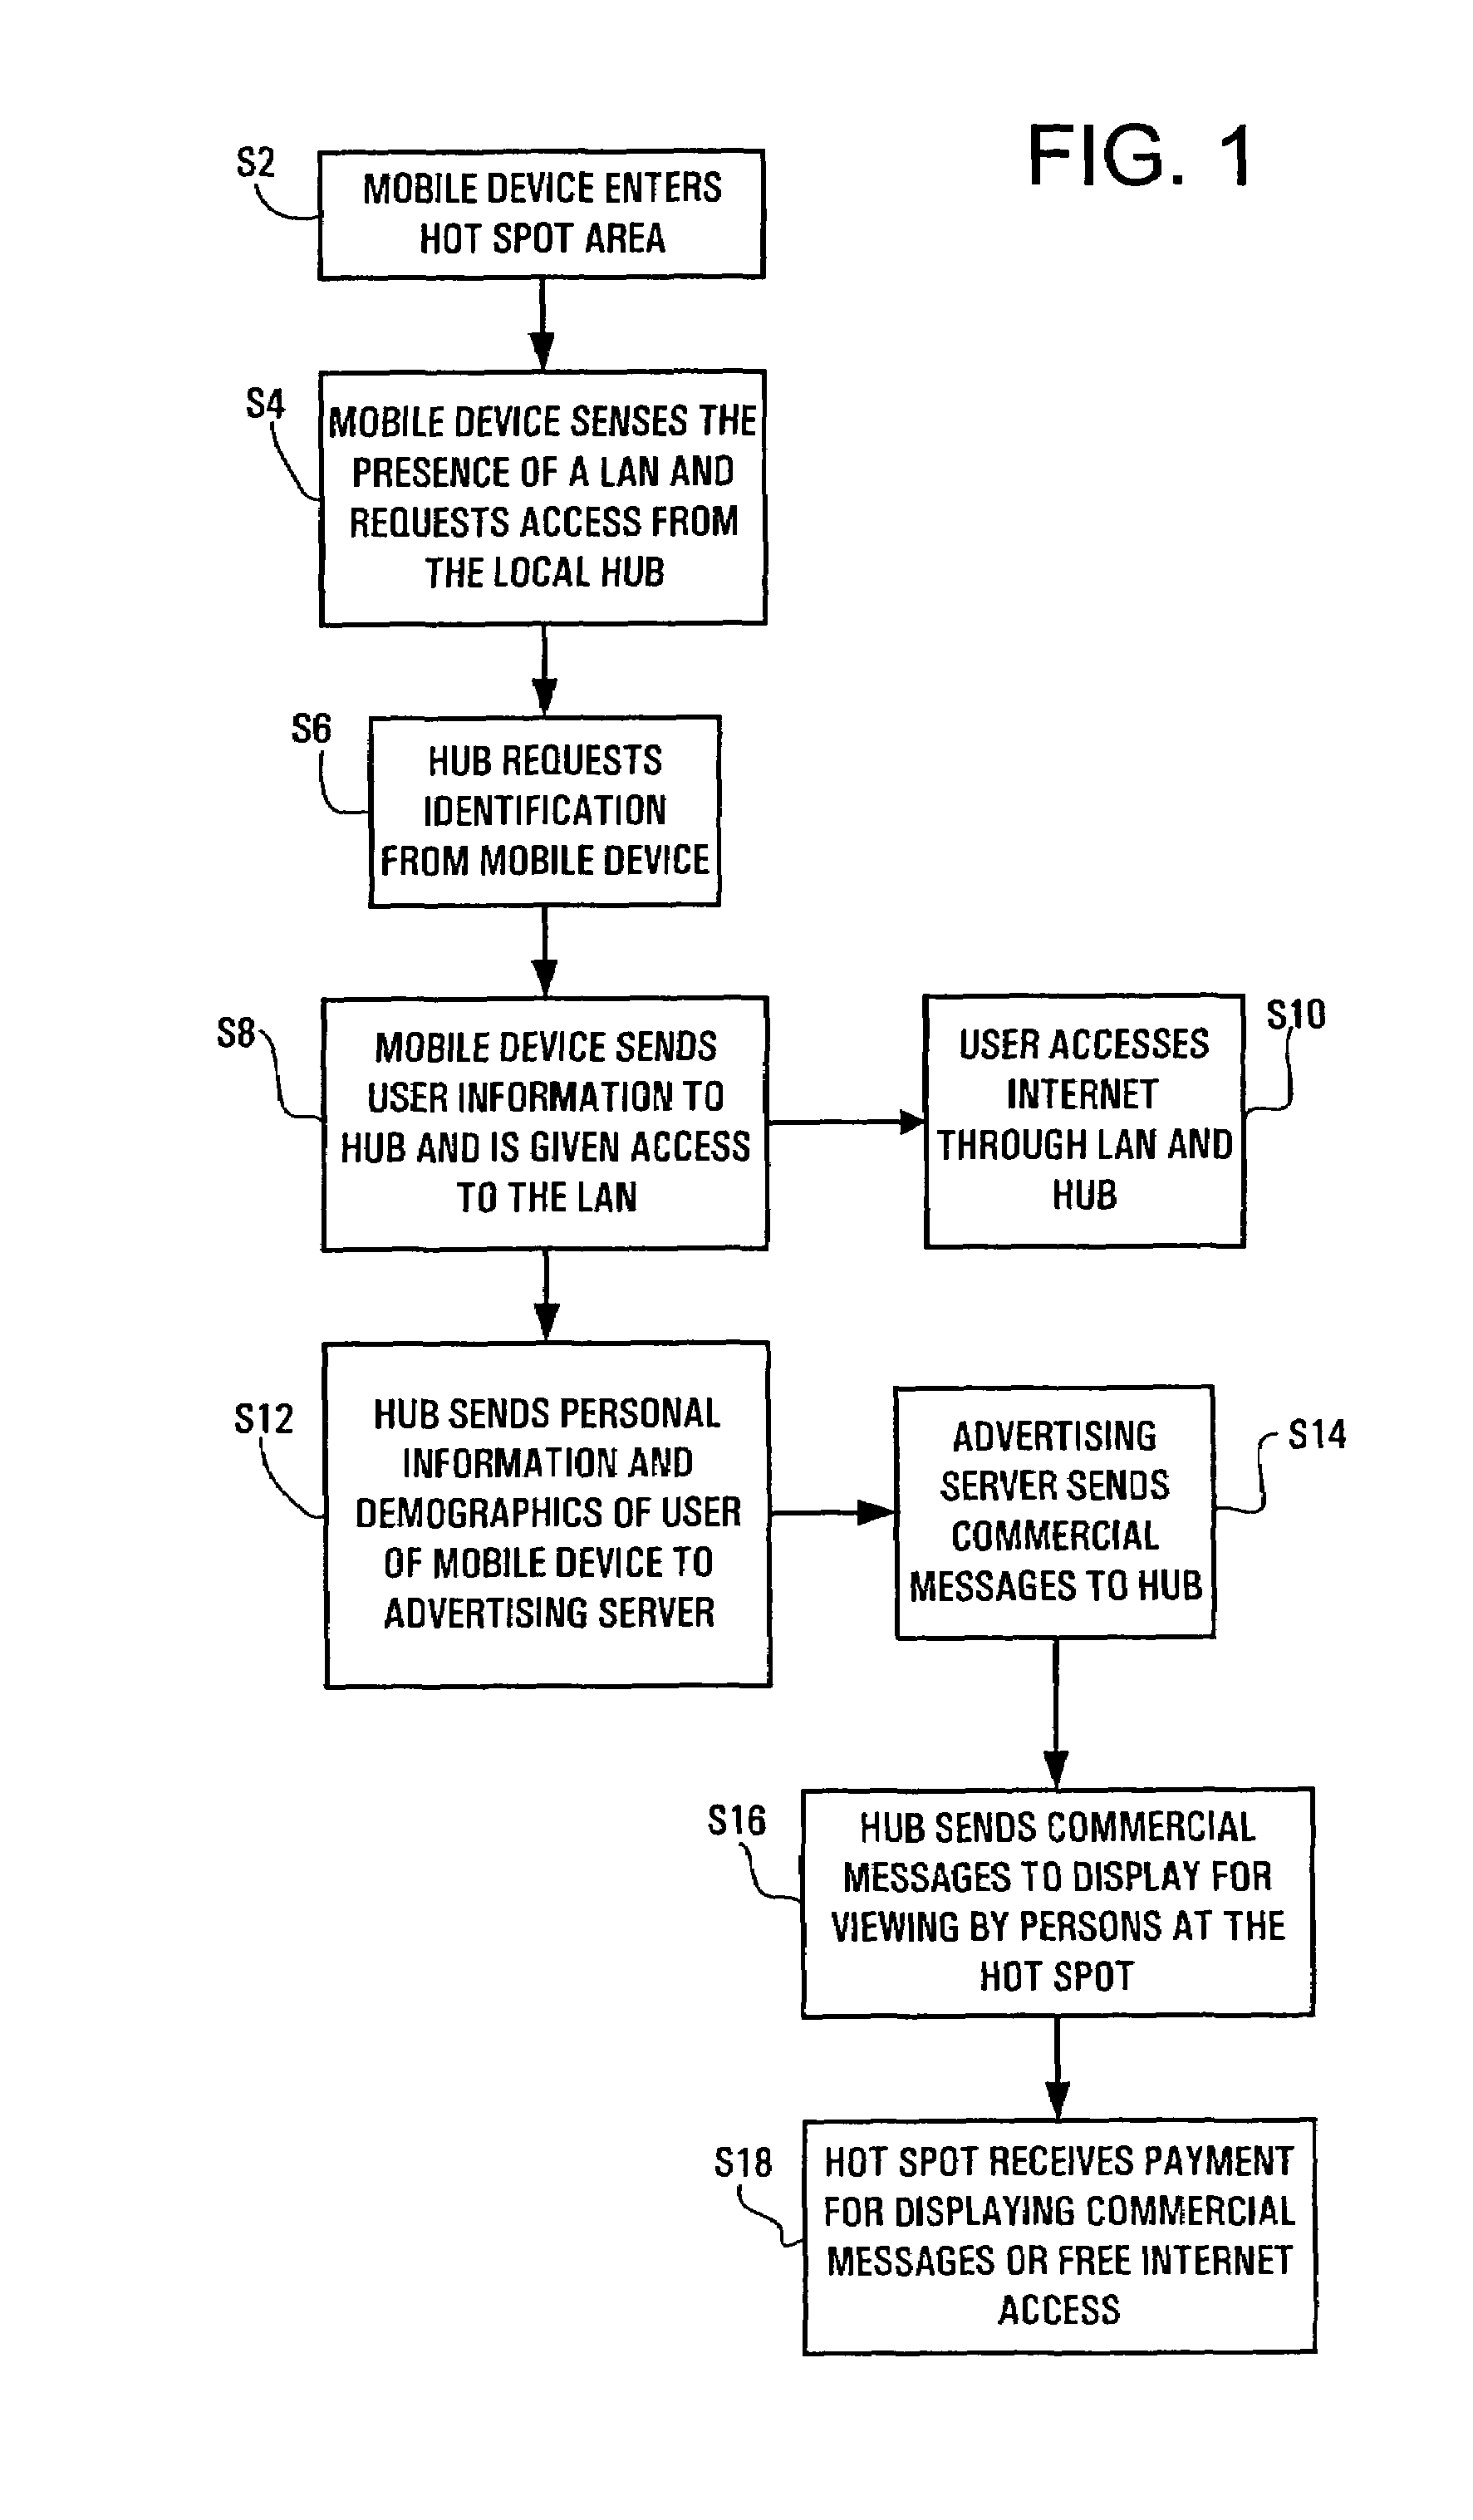 System and method for public wireless network access subsidized by dynamic display advertising